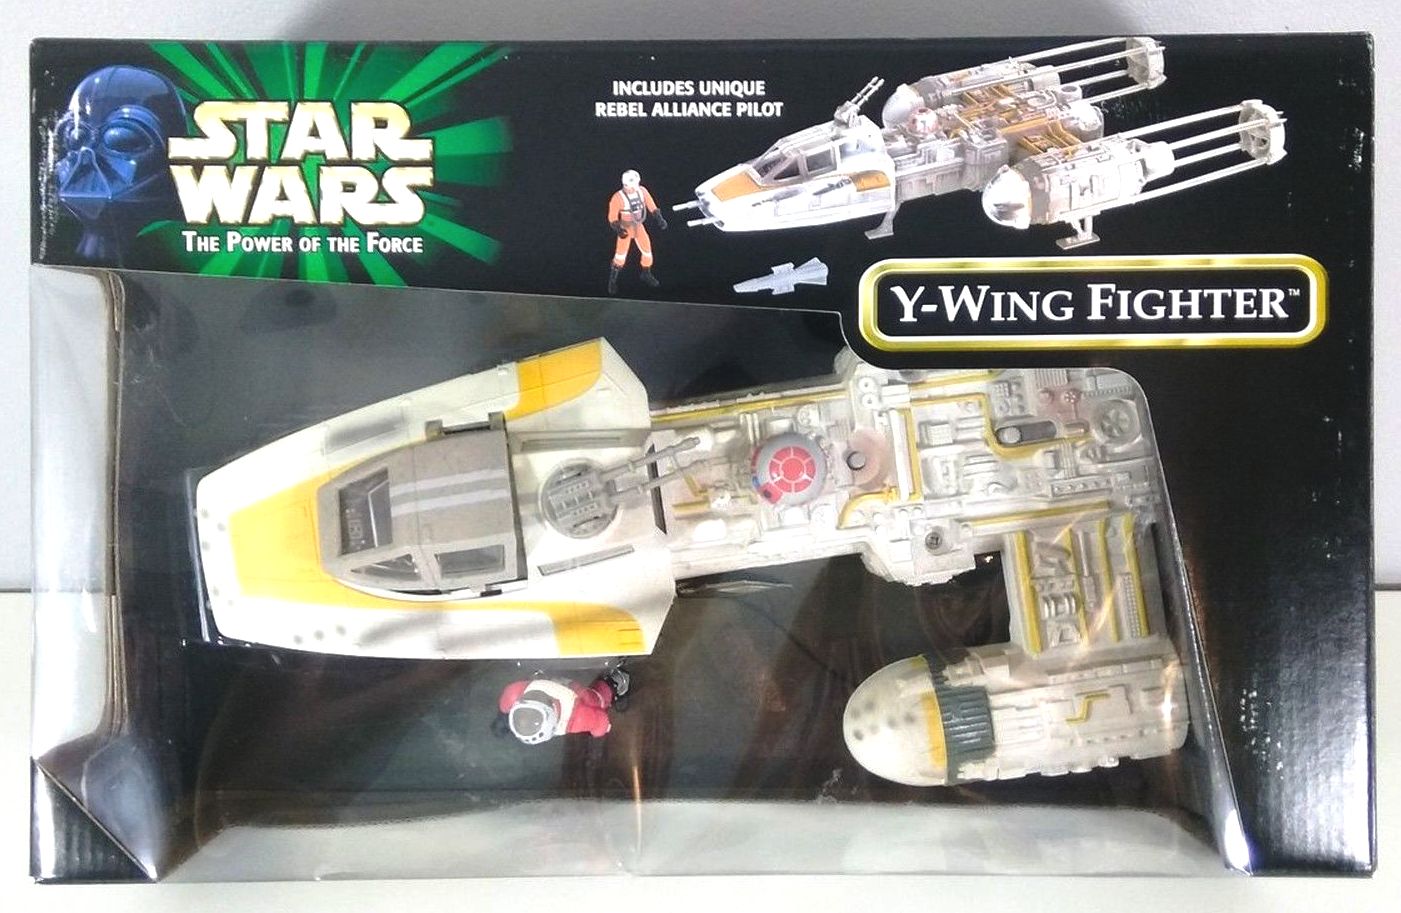 Y-Wing Fighter “w/Unique Rebel Alliance Pilot!” (Star Wars “The 